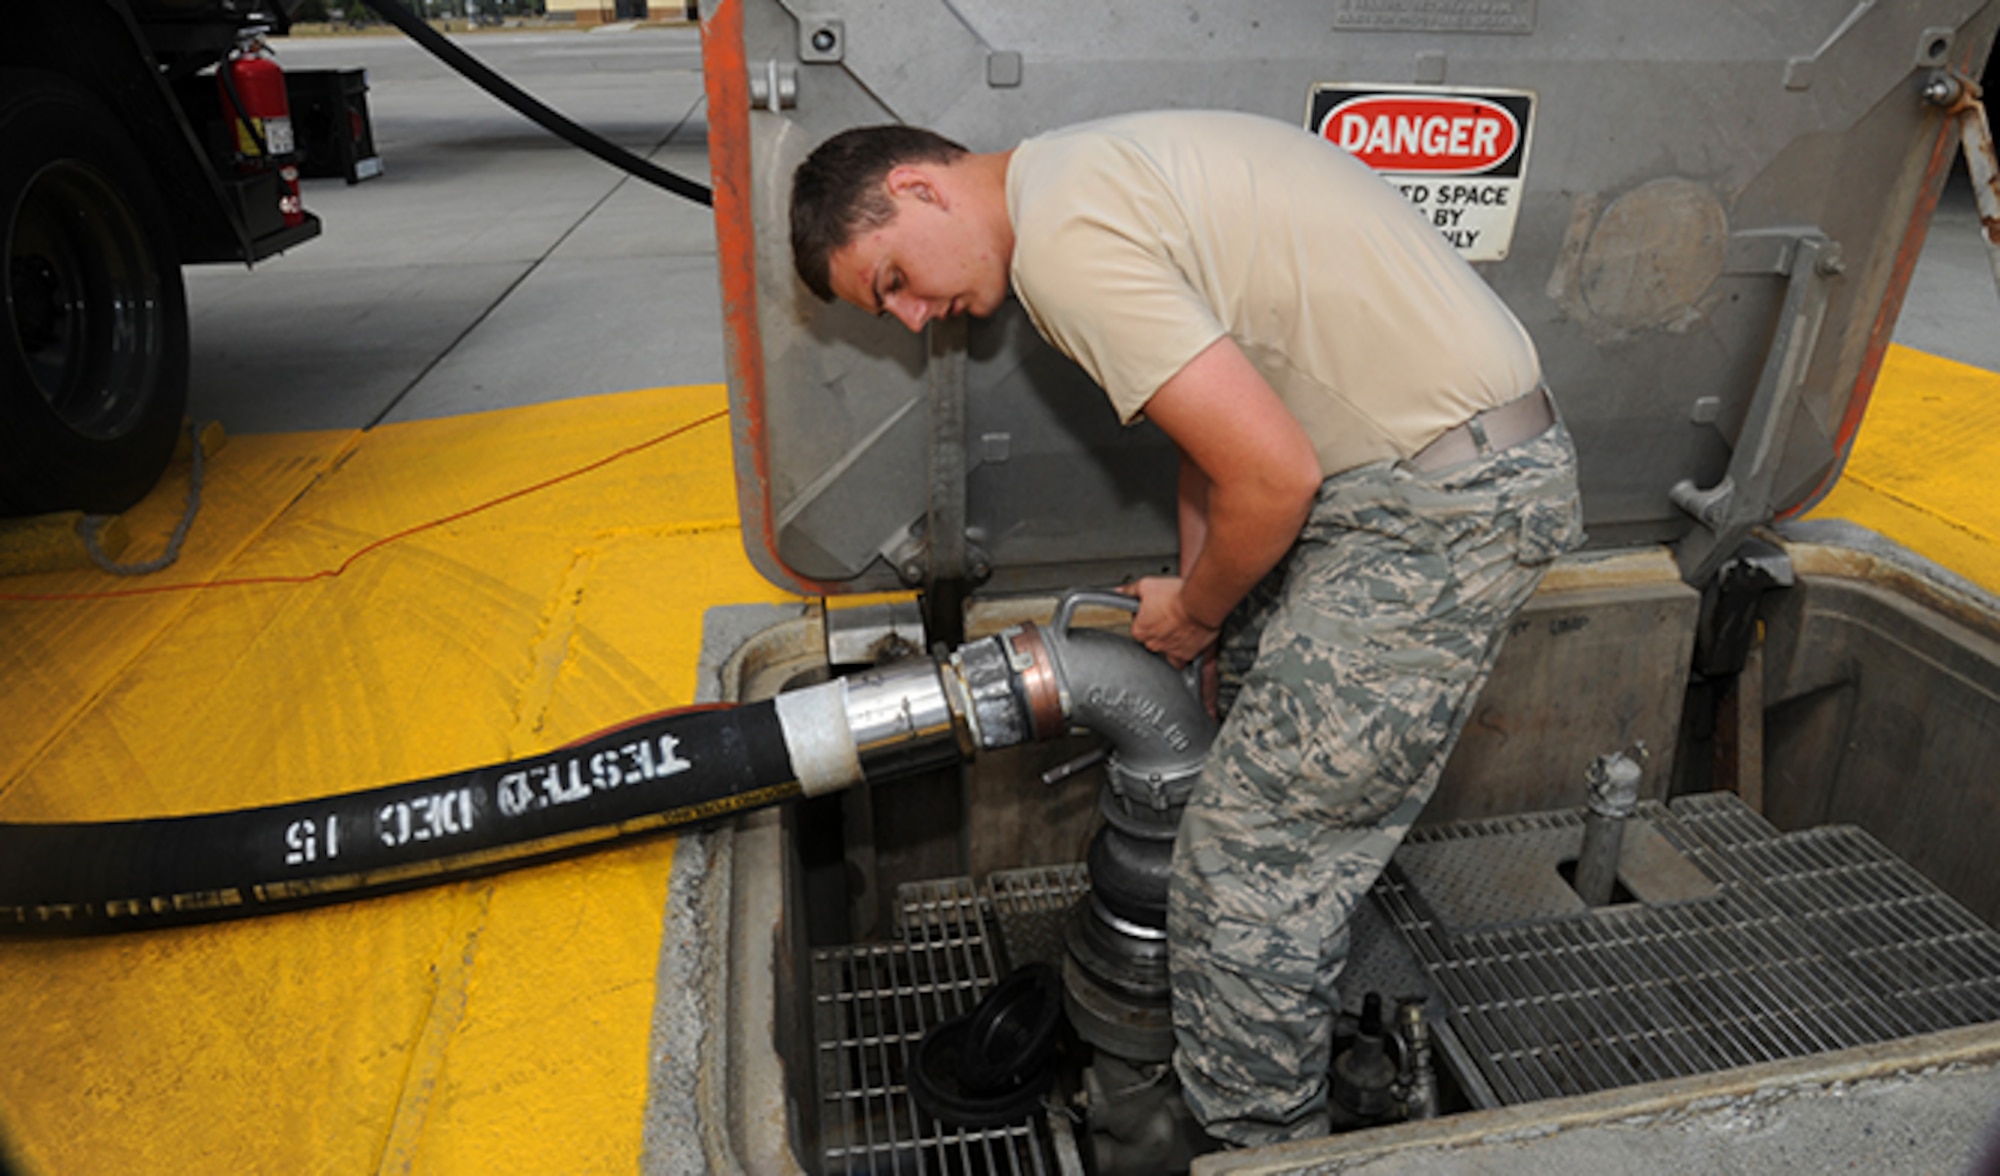 Airman 1st Class Michael Peek, 92nd Logistics Readiness Squadron refueling equipment operator, connects a hydrant refueling truck to the fuel mains Aug. 8, 2016, at Fairchild Air Force Base, Wash. Refueling hydrant trucks are mobile fuel pumps that are capable of pumping fuel up to 300 gallons per minute. (U.S. Air Force photo/Senior Airman Sam Fogleman)